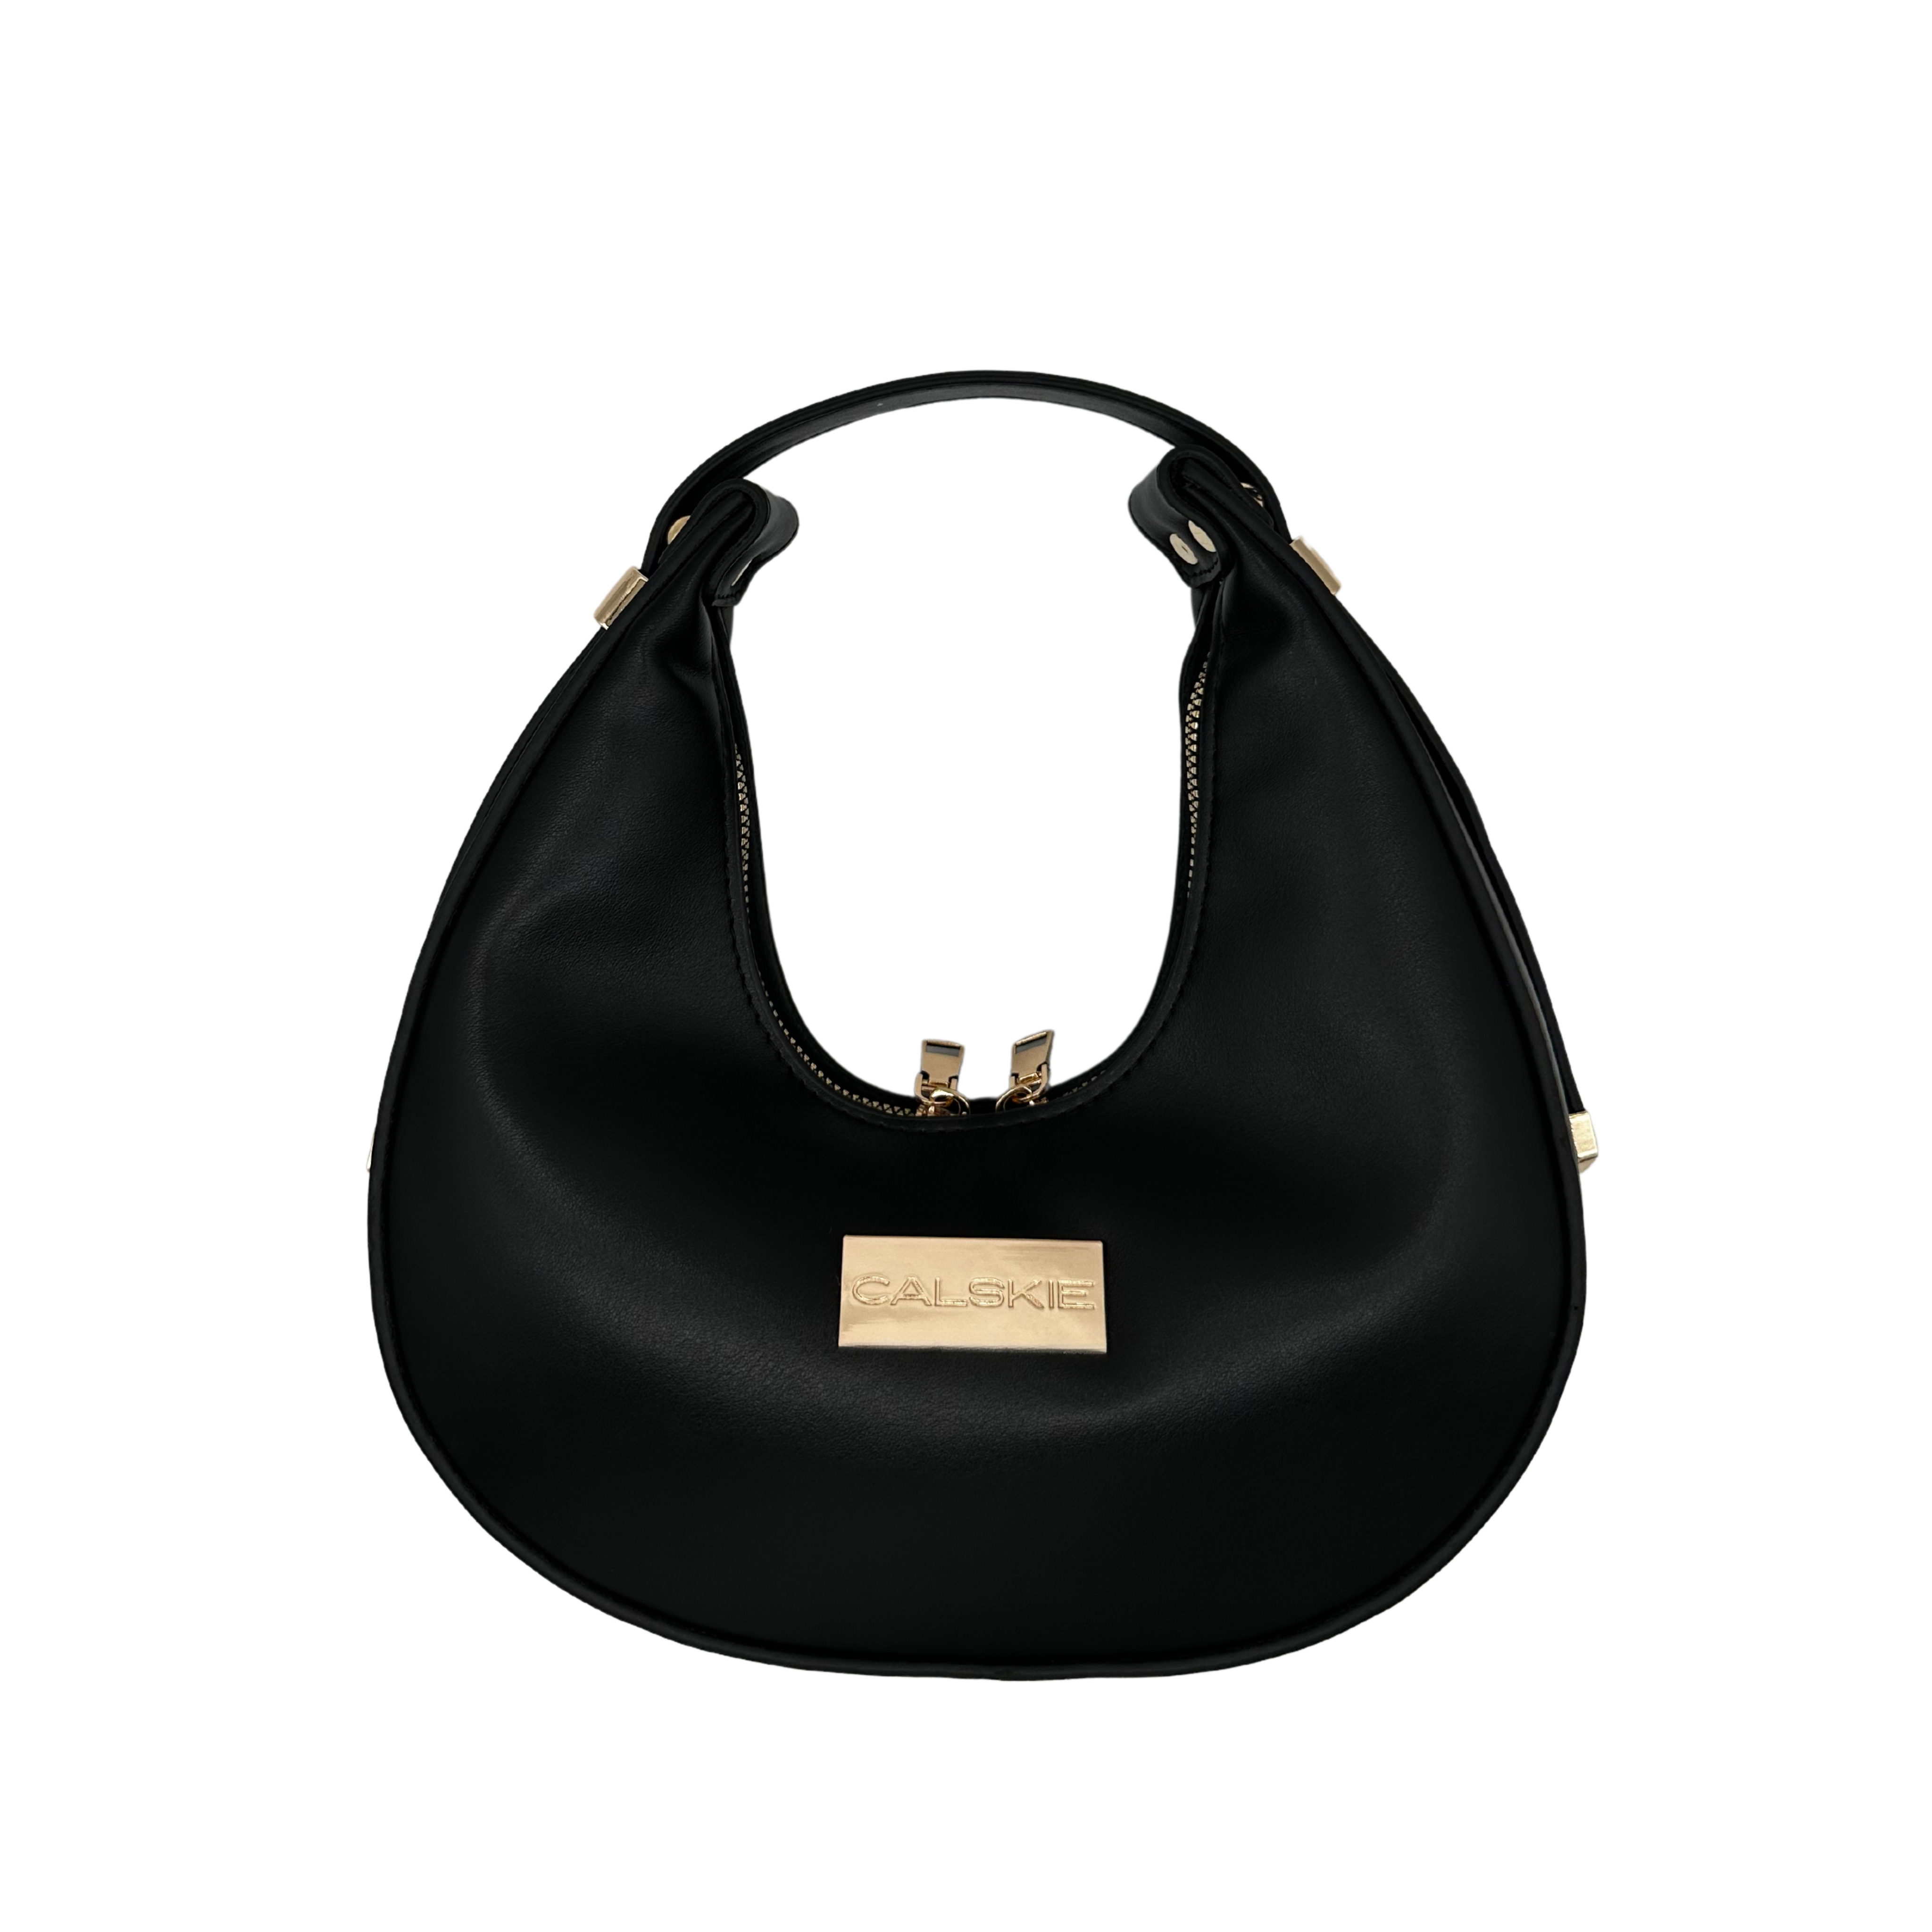 Black Vegan Leather Top Handle Bag, a blend of elegance and practicality designed to evoke feelings of empowerment and grace.